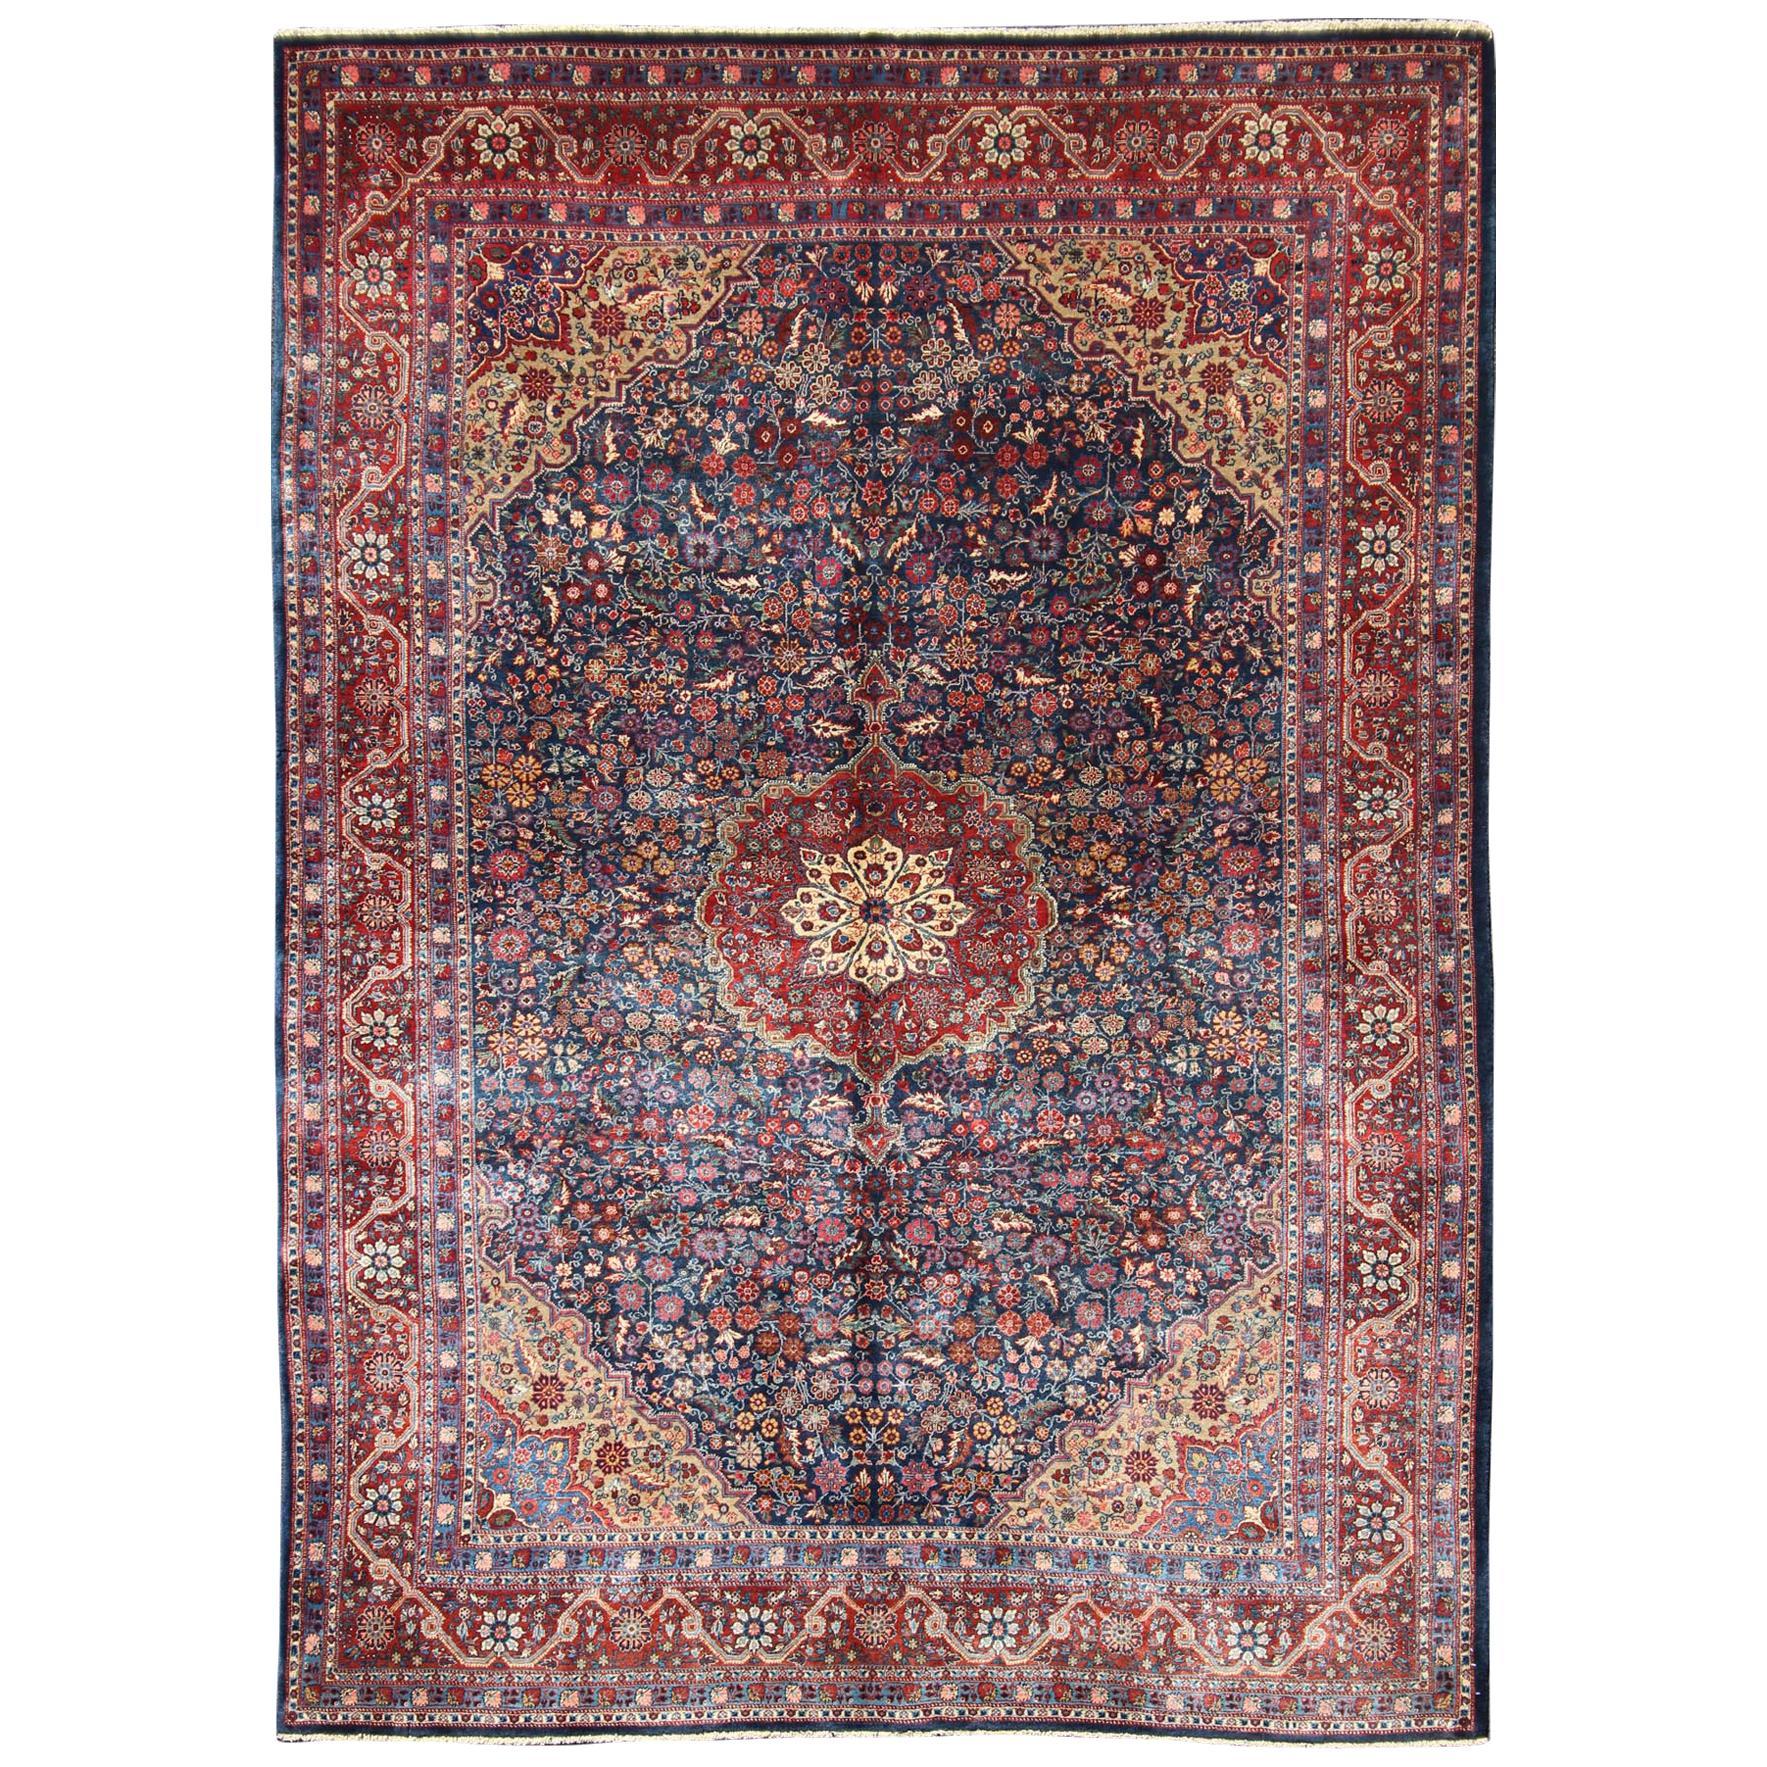 Antique Tribal Medallion Josan Rug with Jewel Tones with Center Medallion For Sale